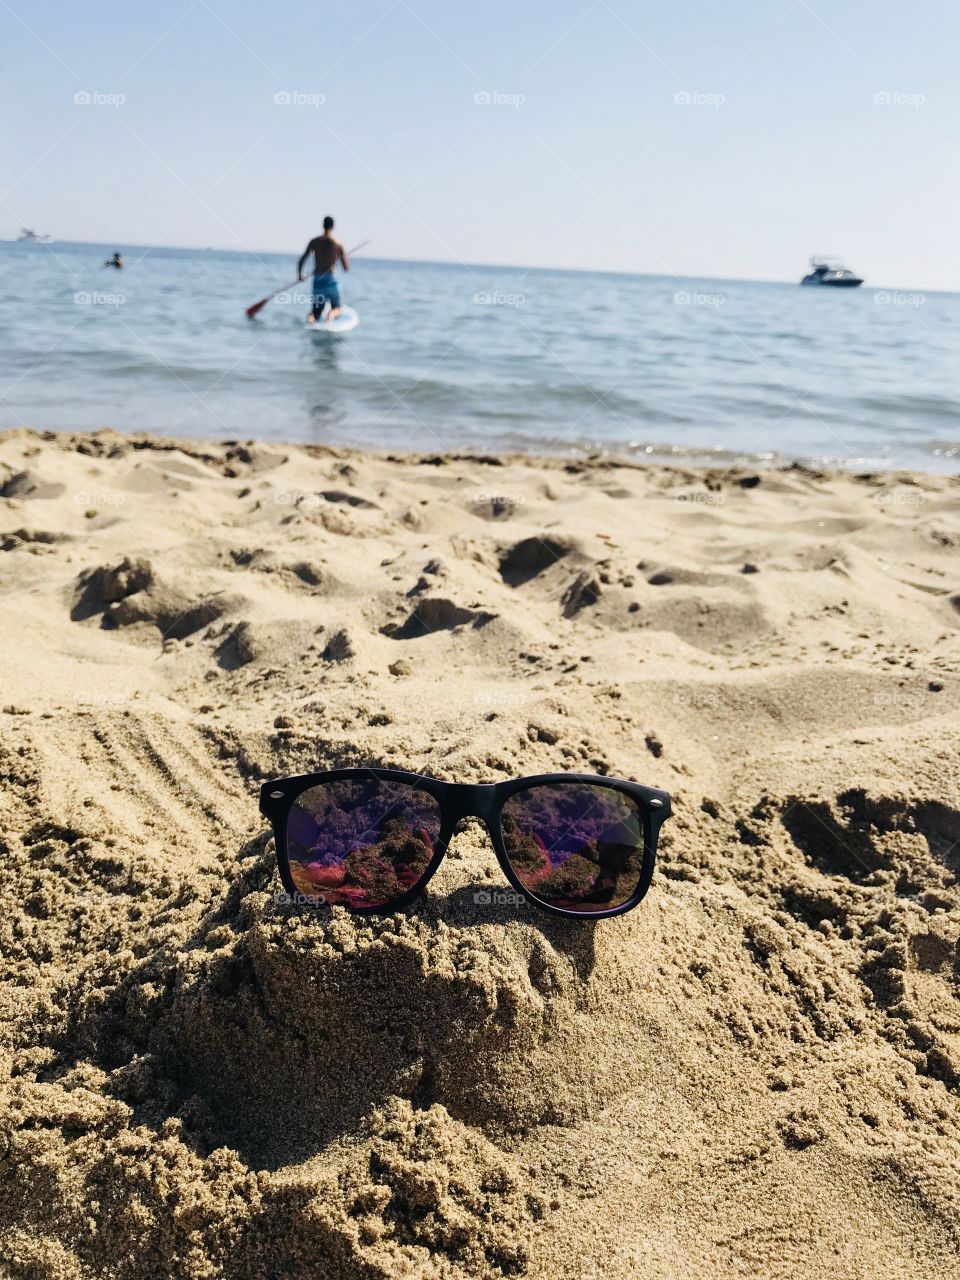 The beach in marbella and summer weather you will need a pair of glasses because the sun is shining bright! ☀️